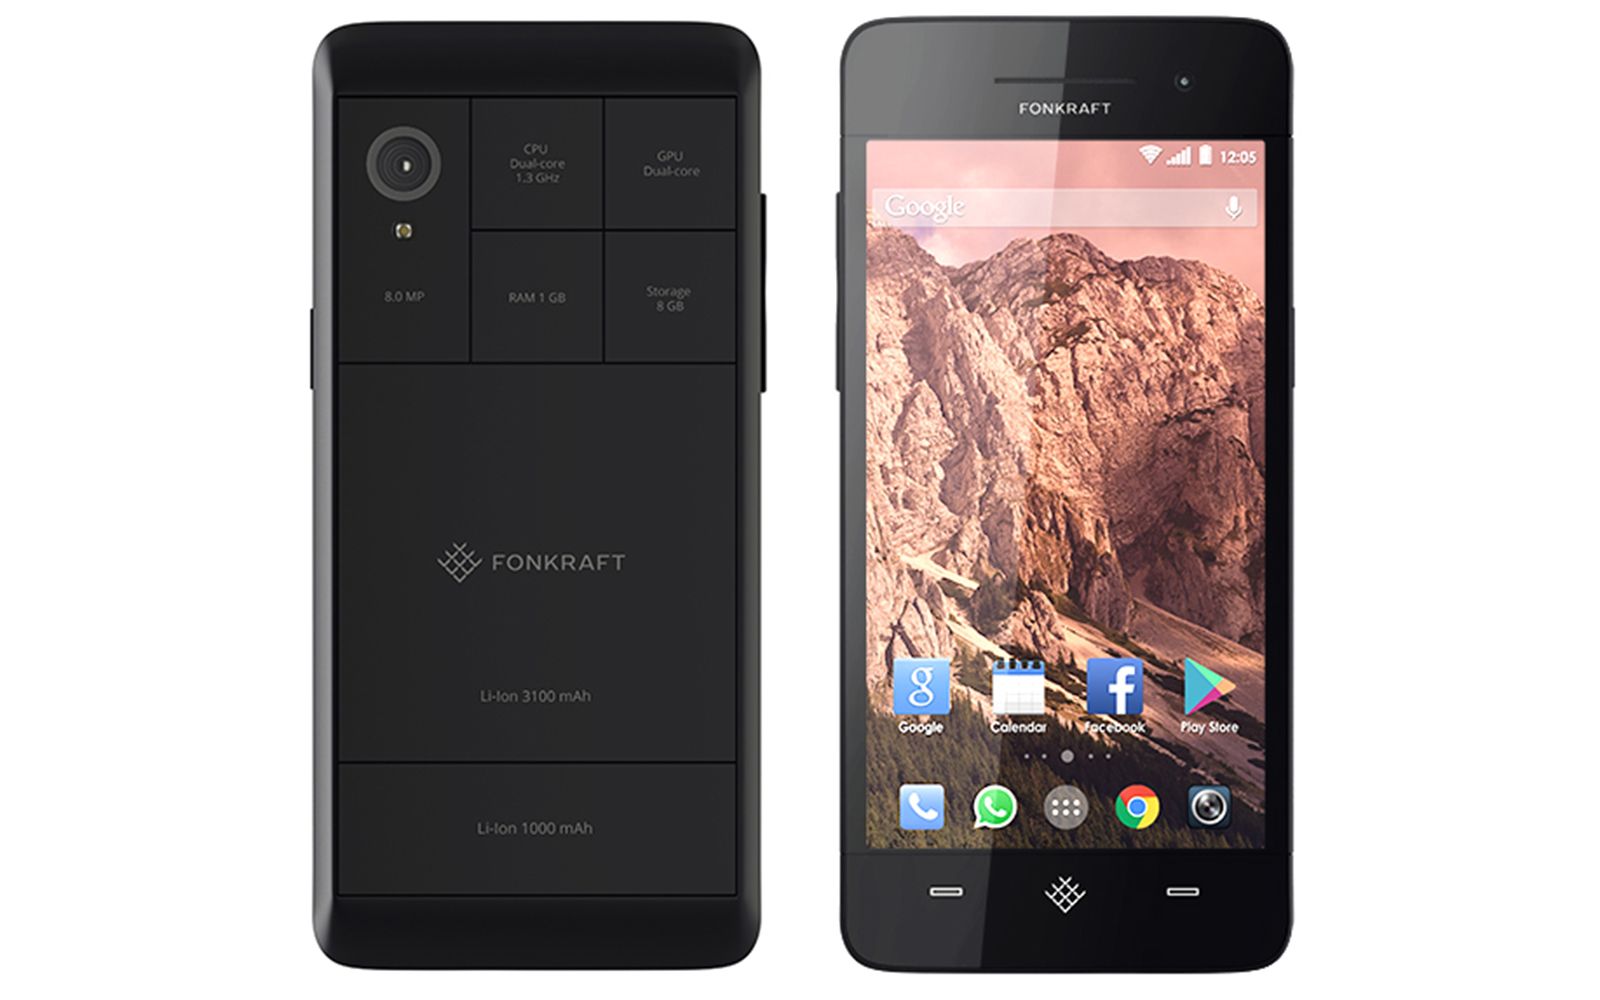 fonkraft modular smartphone with 4 100mah battery 20mp camera 192khz audio and more is here image 3